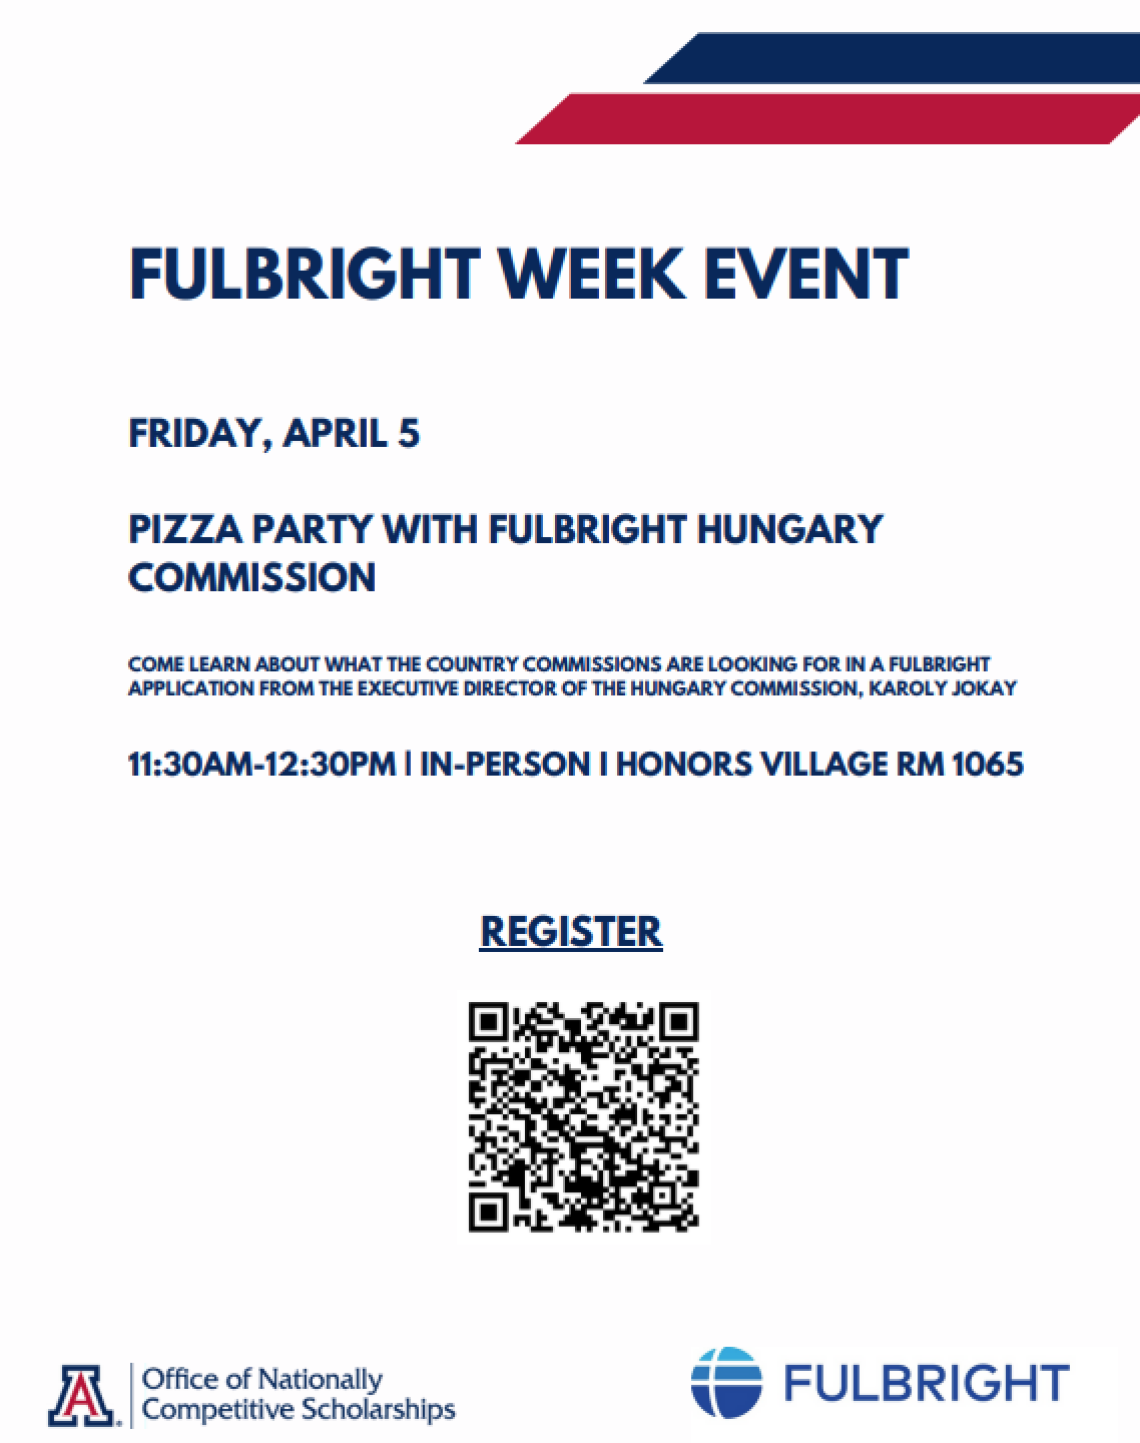 Pizza Party Fulbright